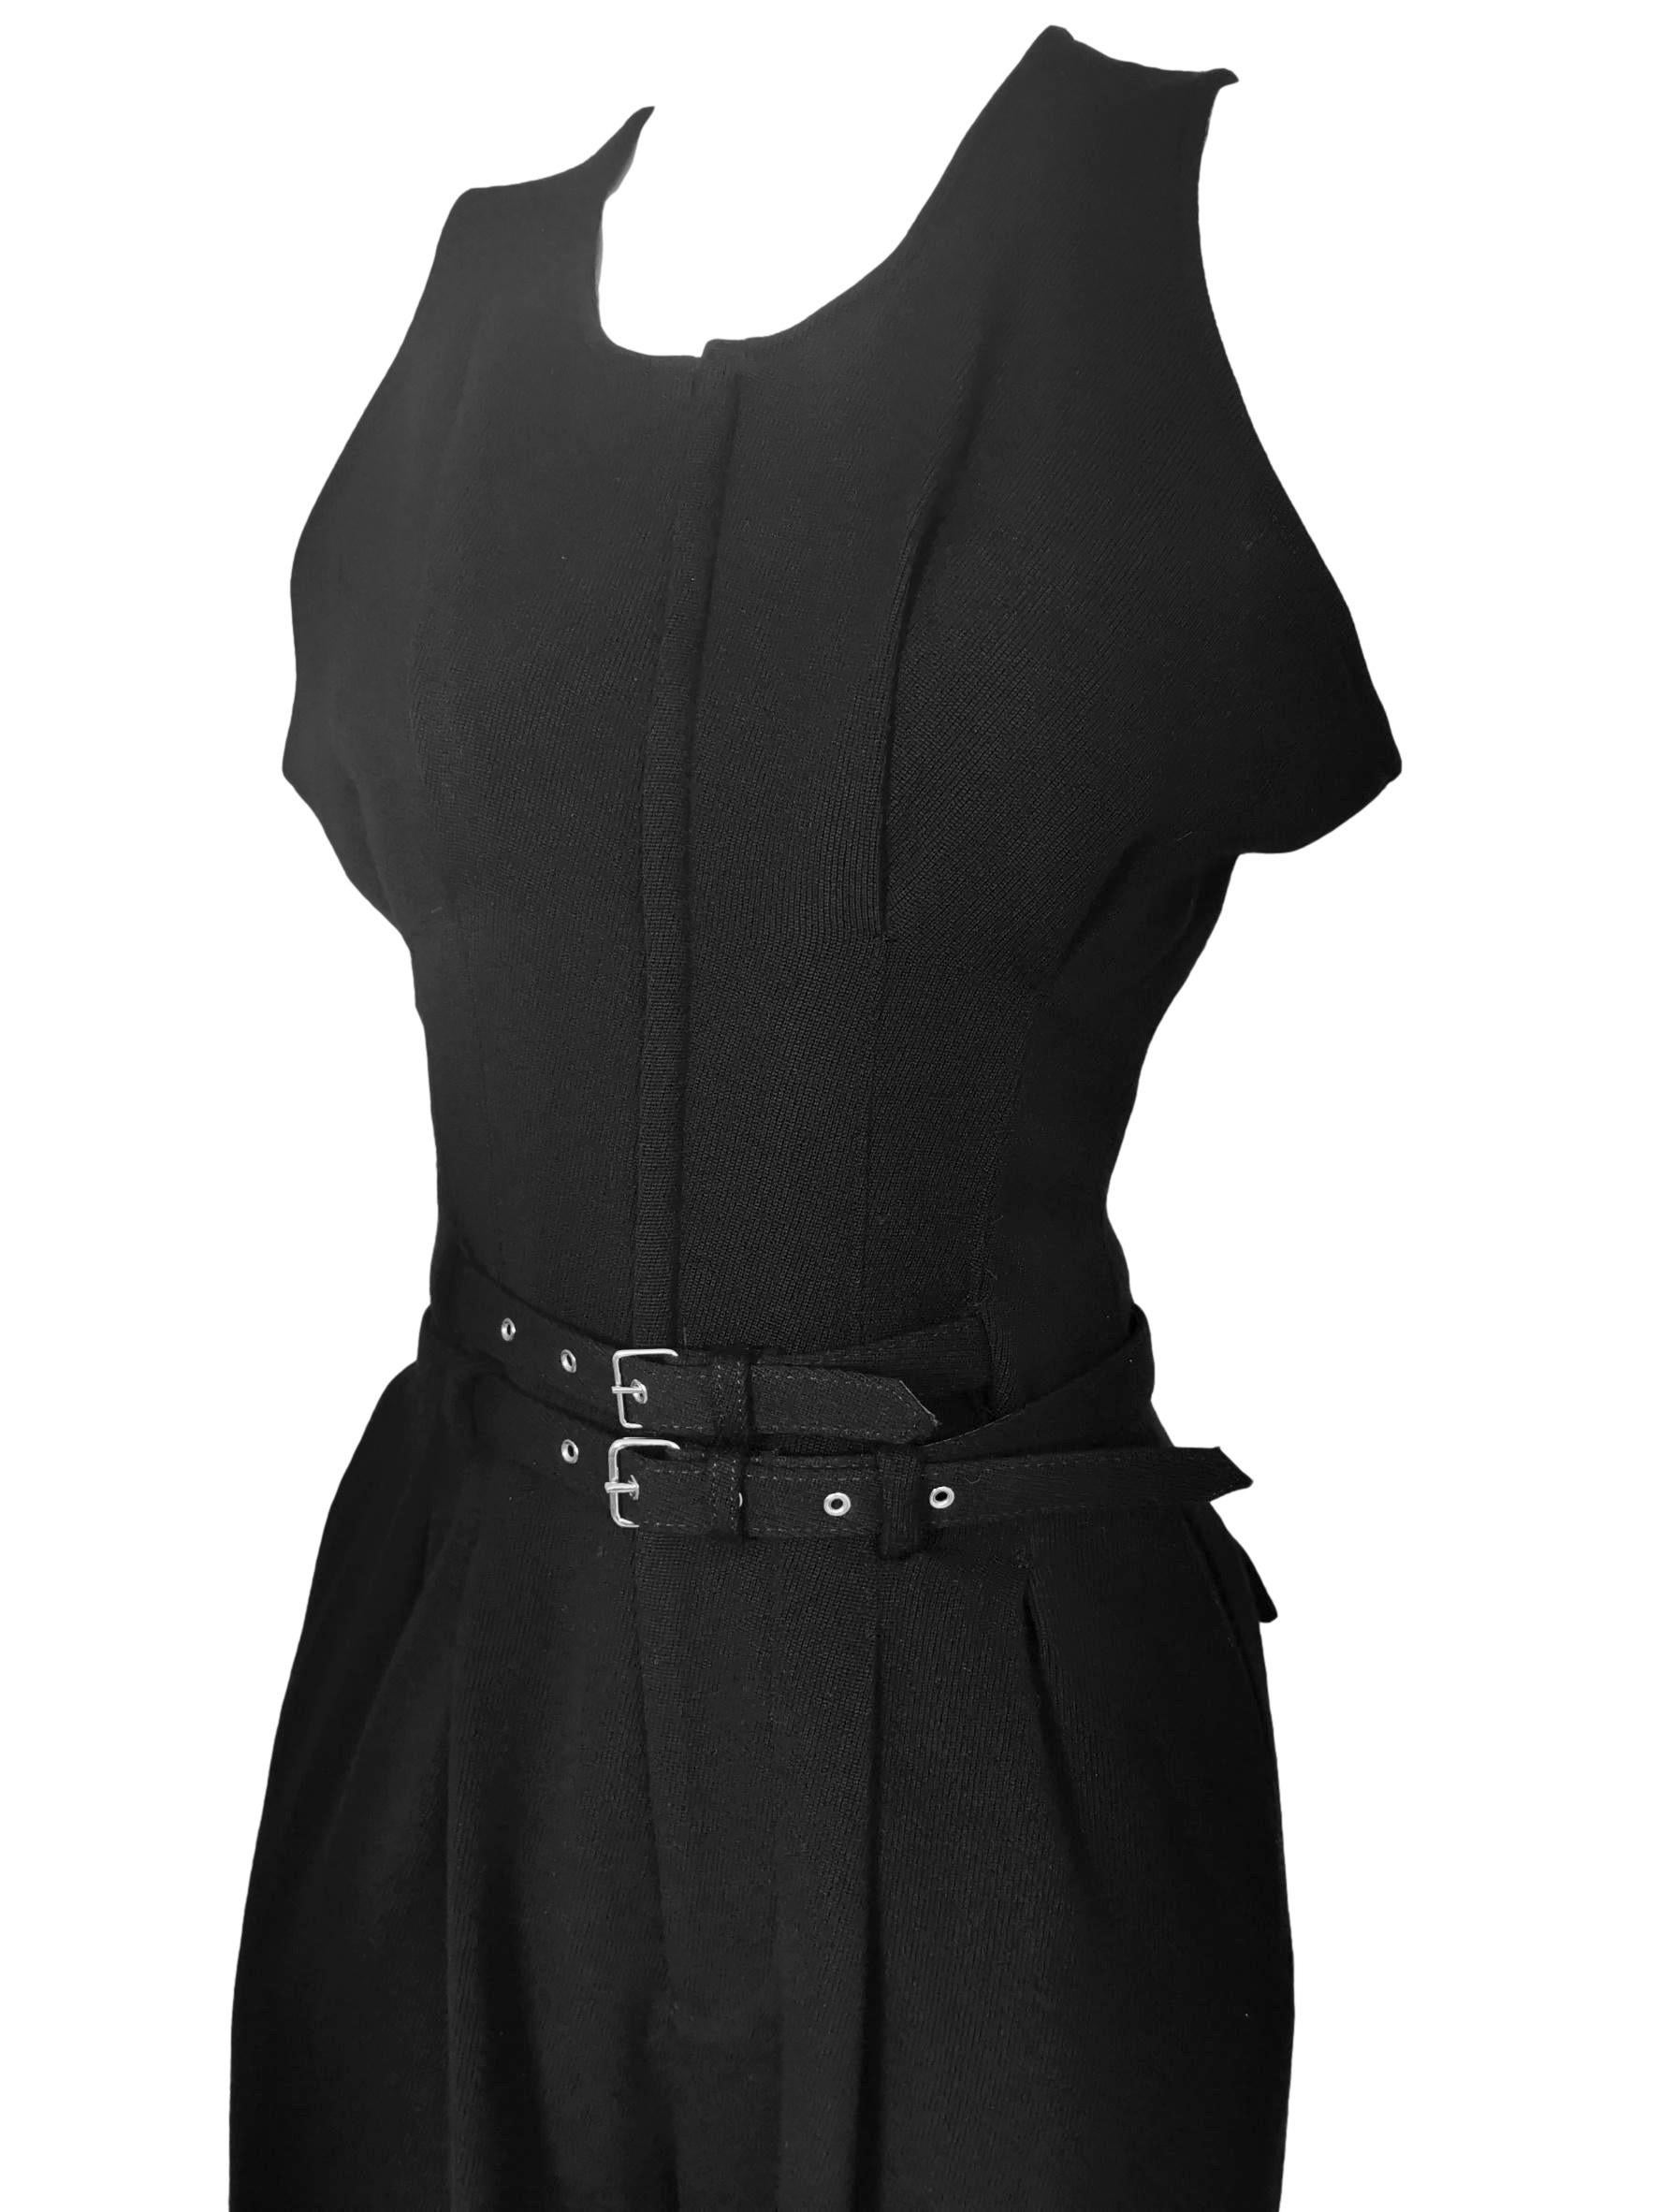 Comme des Garcons Wool Double Belted Jumpsuit AD 1989 In Good Condition For Sale In Bath, GB